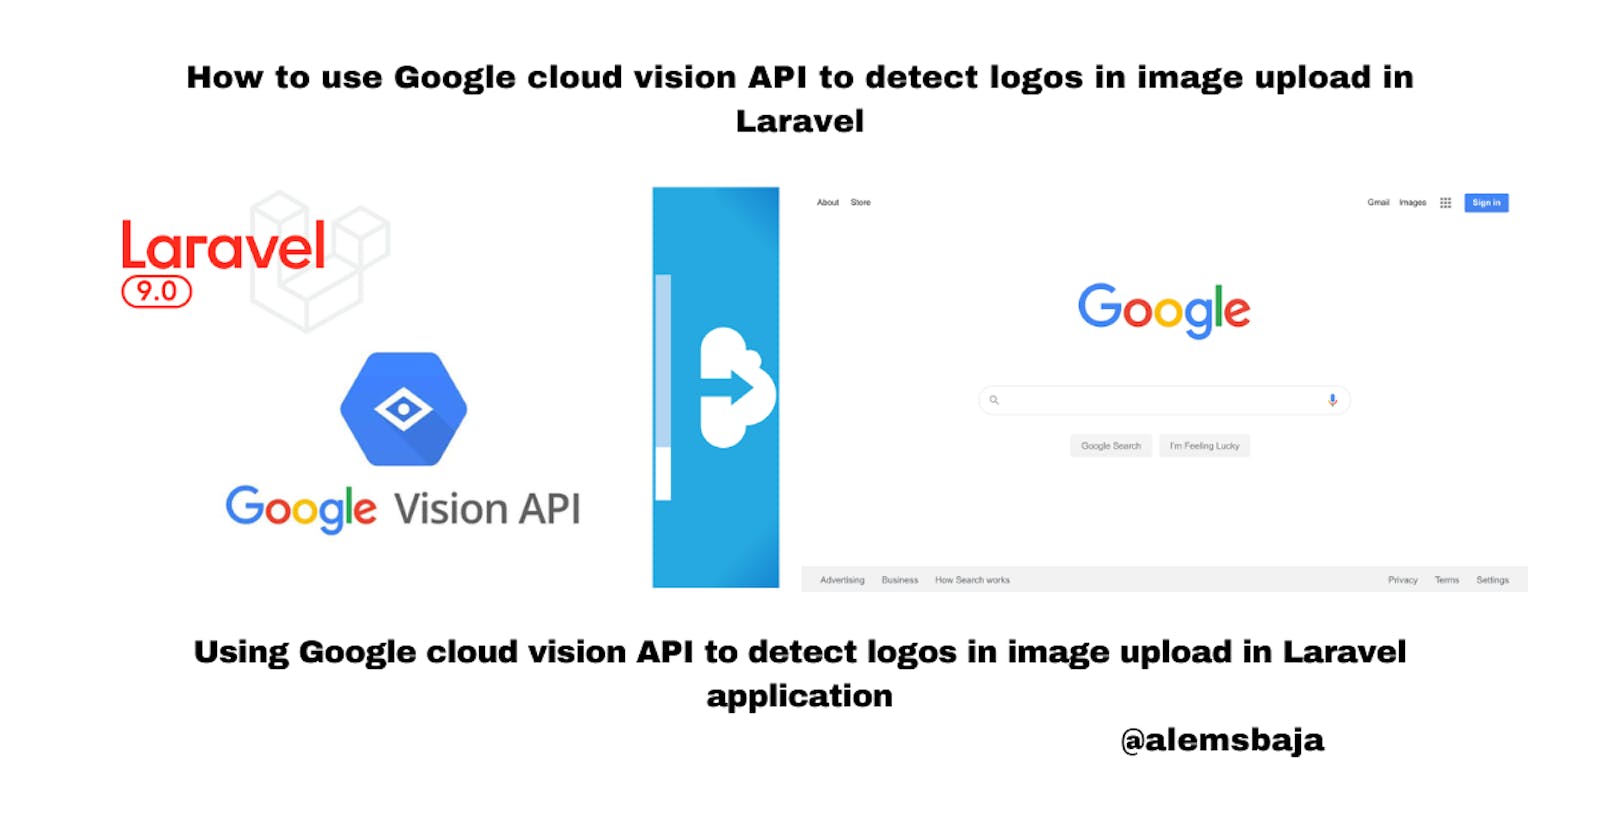 How to use Google cloud vision API to detect logos in image upload in Laravel